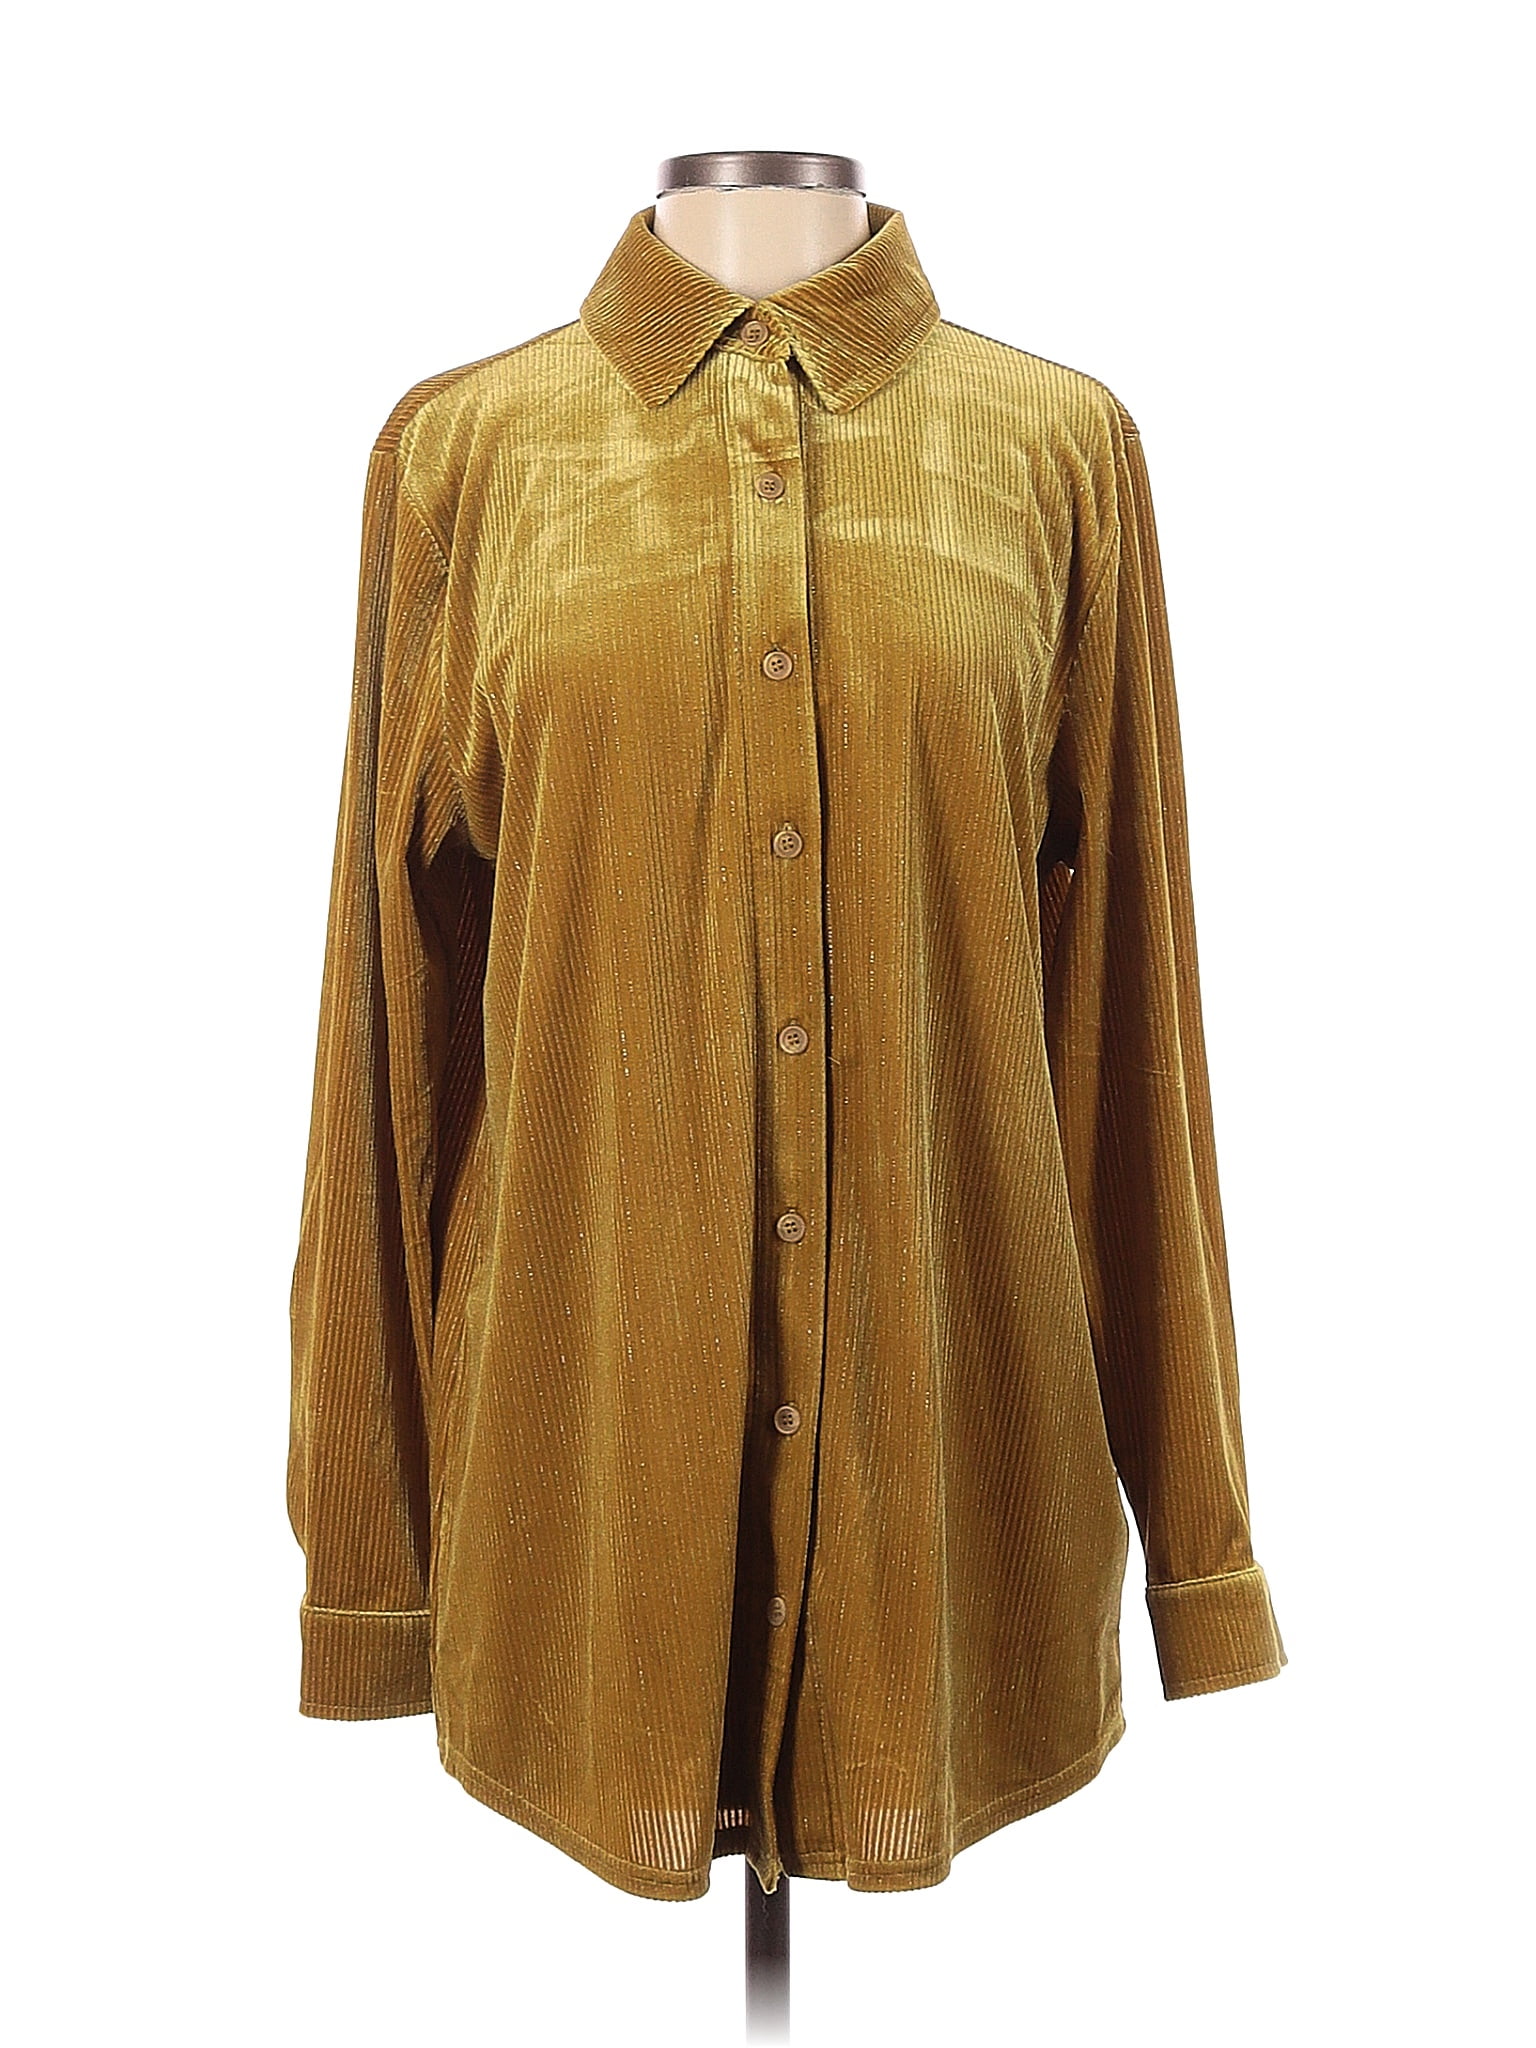 Soft Surroundings Solid Yellow Long Sleeve Blouse Size S - 66% off ...